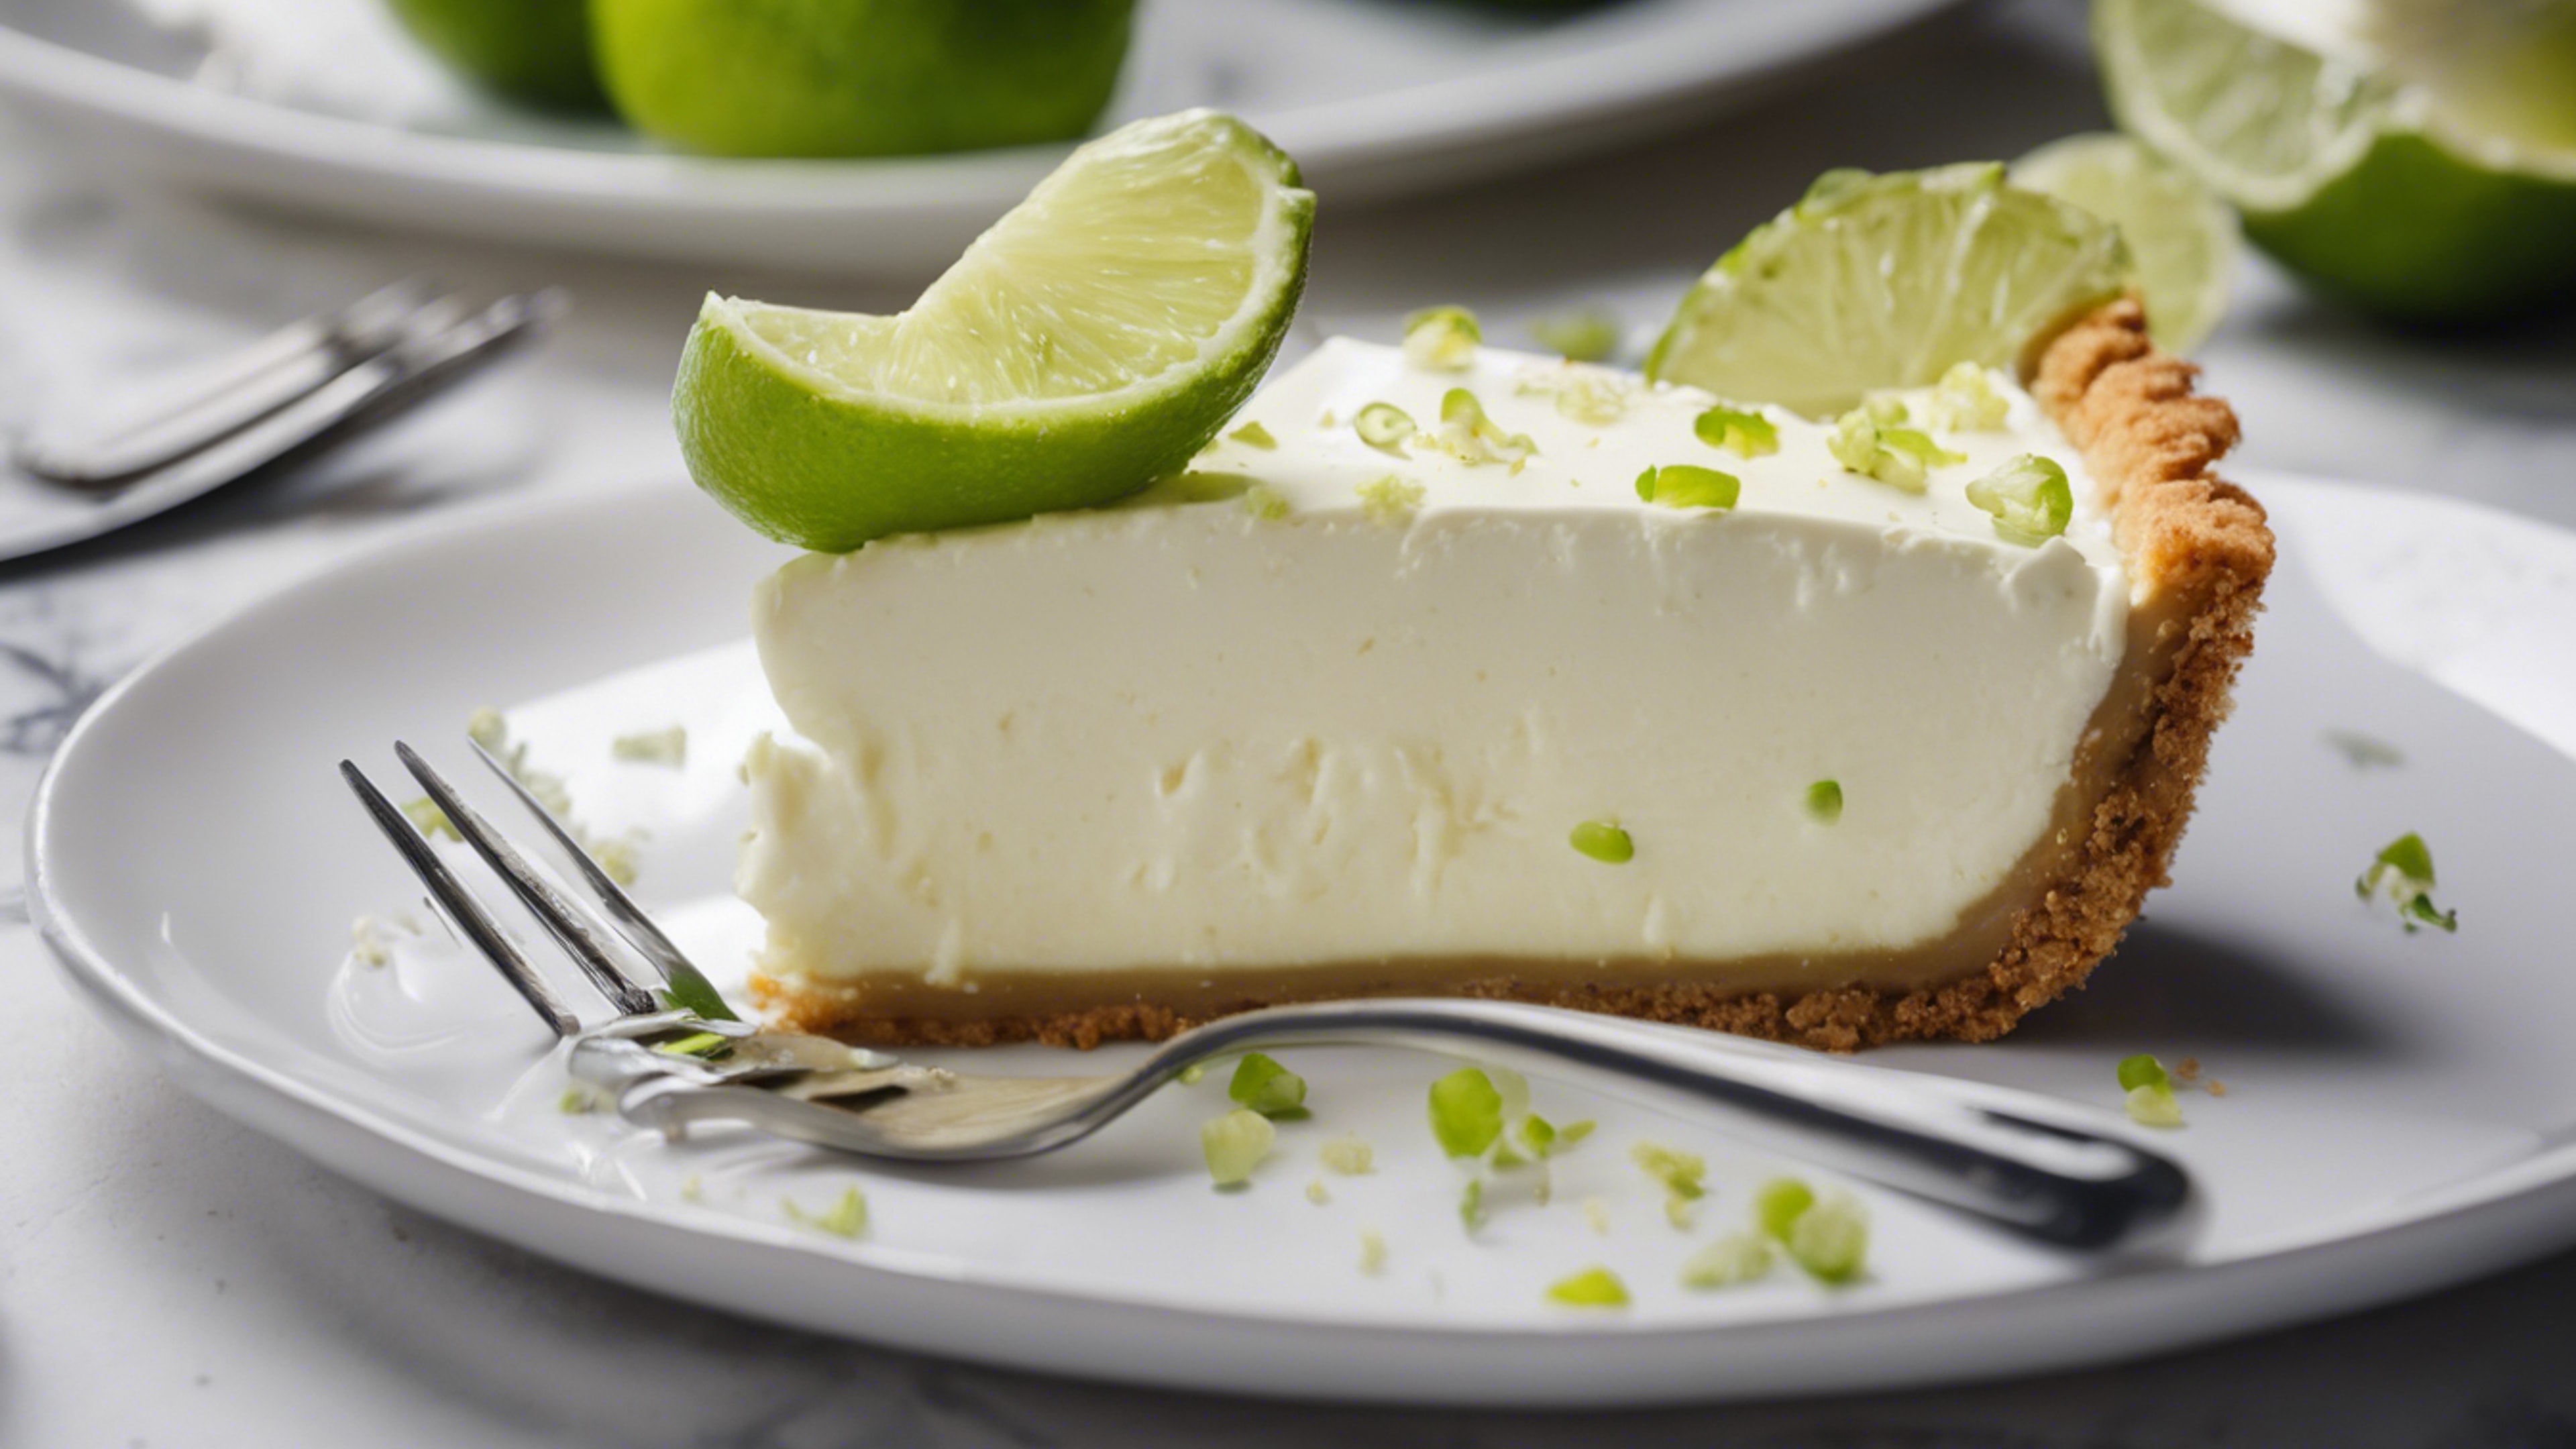 Delicious key lime pie served on a white ceramic plate with a silver fork. טפט[dc9d1e1923f243919b66]